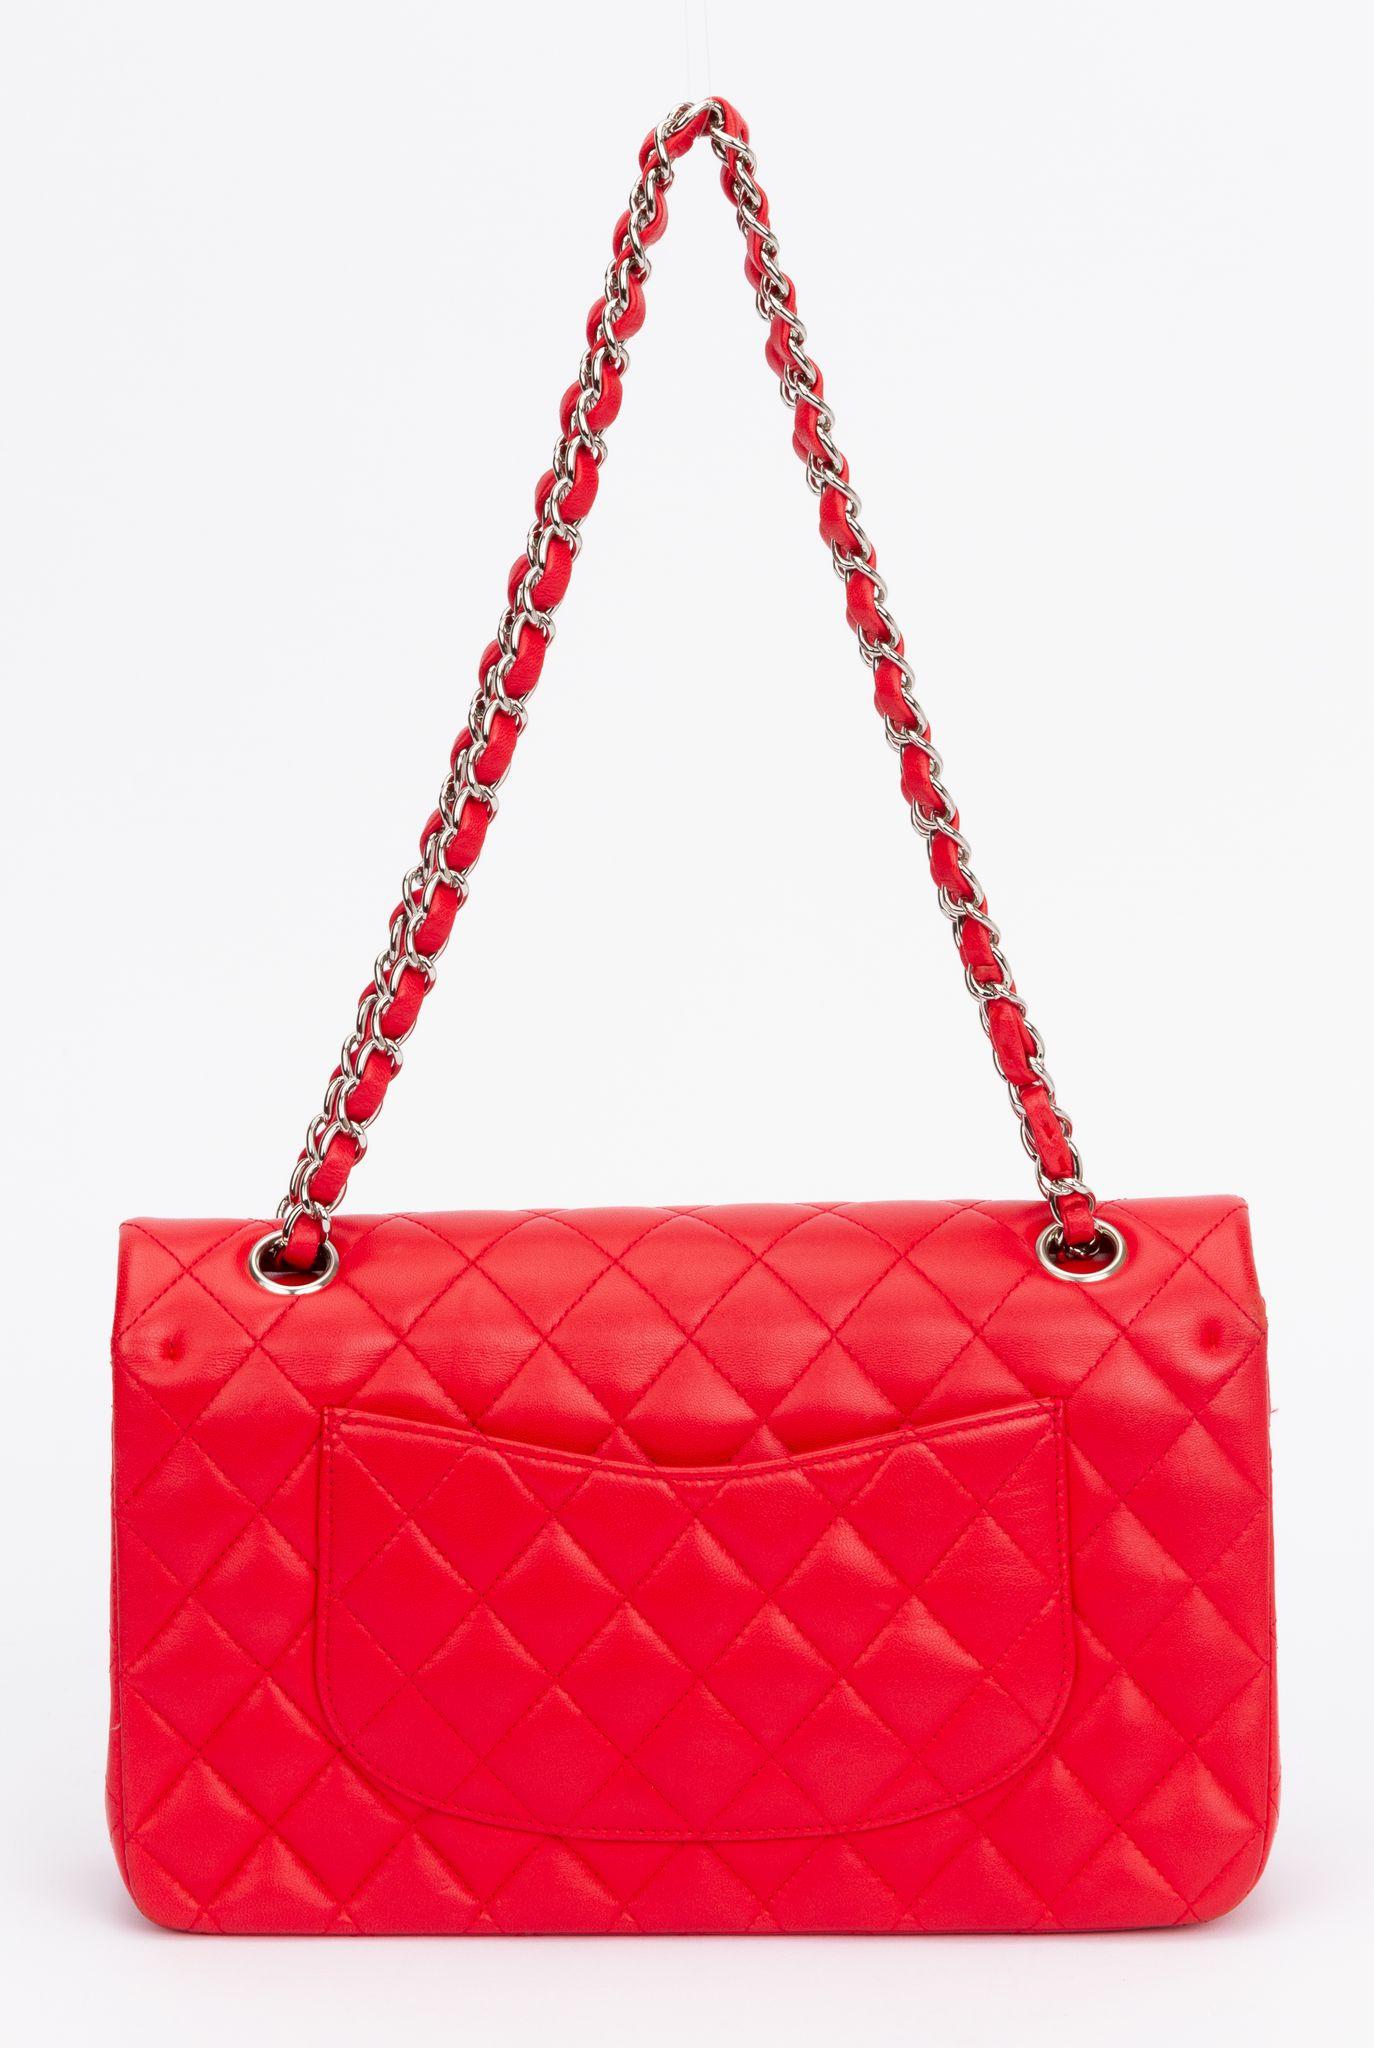 Chanel Bright Red 10 Double Flap Bag In Excellent Condition For Sale In West Hollywood, CA